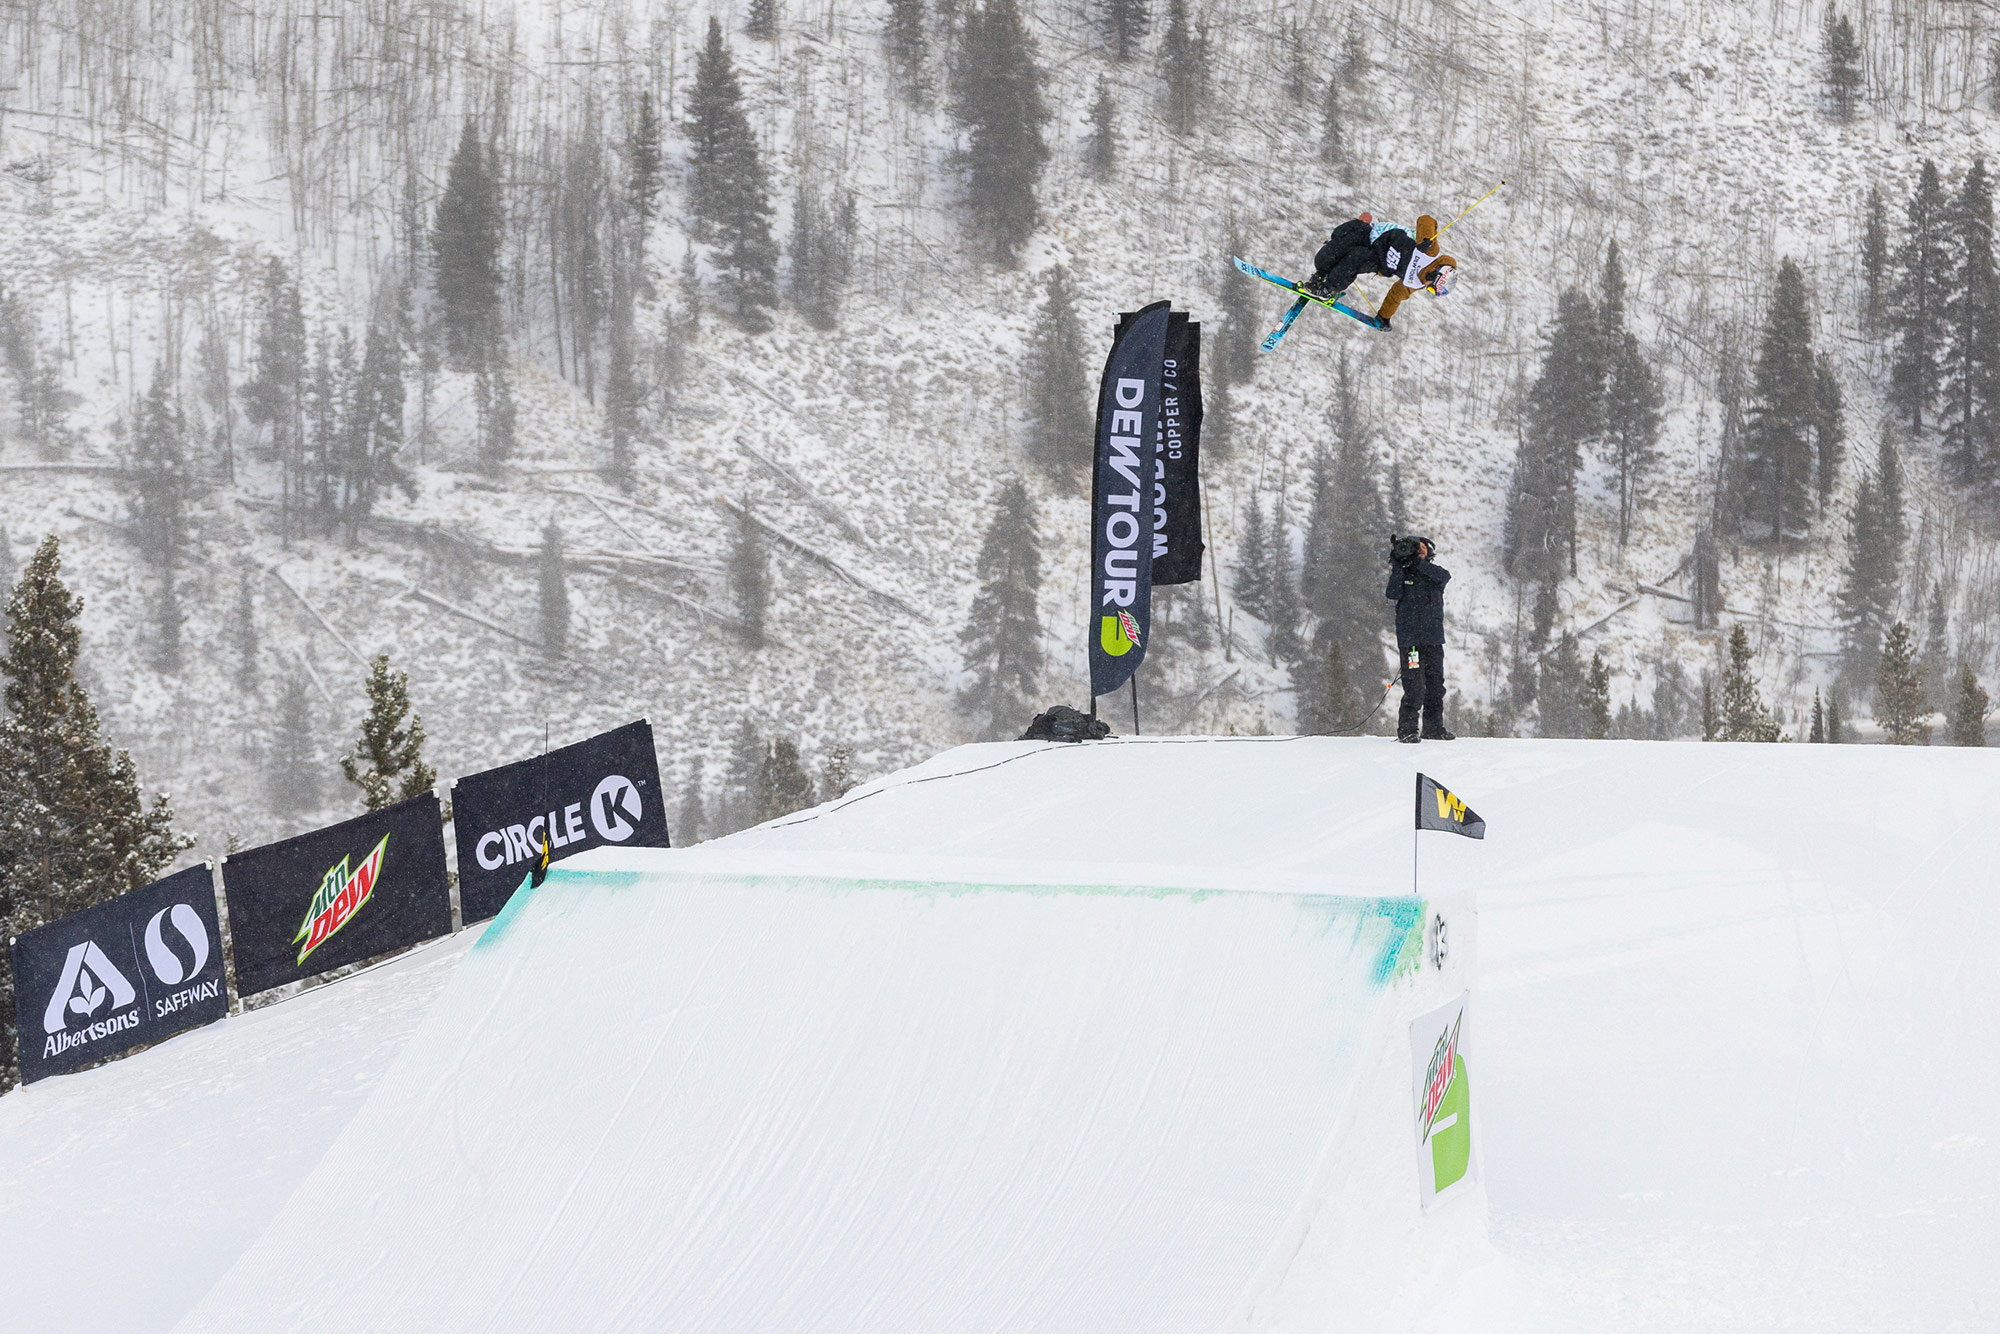 Nick Goepper competes in men's ski slopestyle finals at the 2021 Winter Dew Tour.